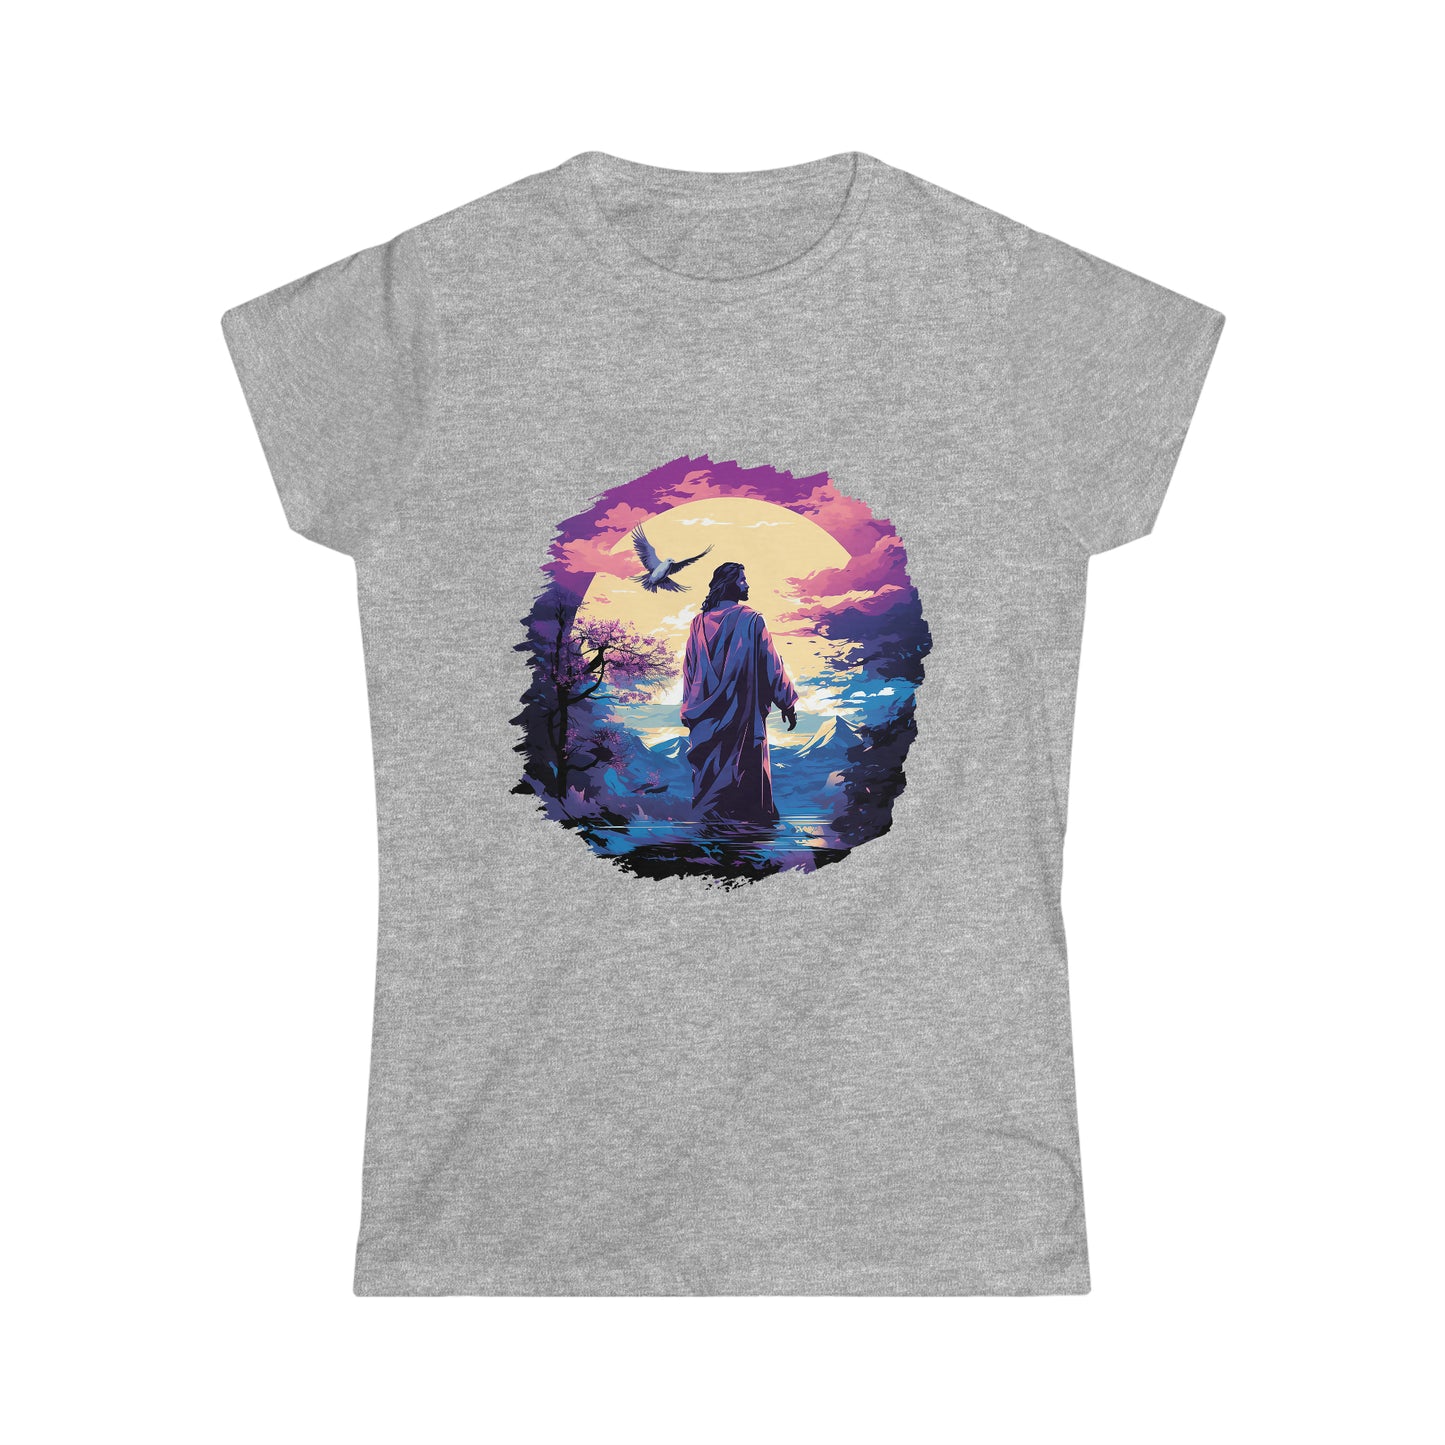 Christian T-Shirt - Jesus and The Holy Spirit - Women - Softstyle Tee